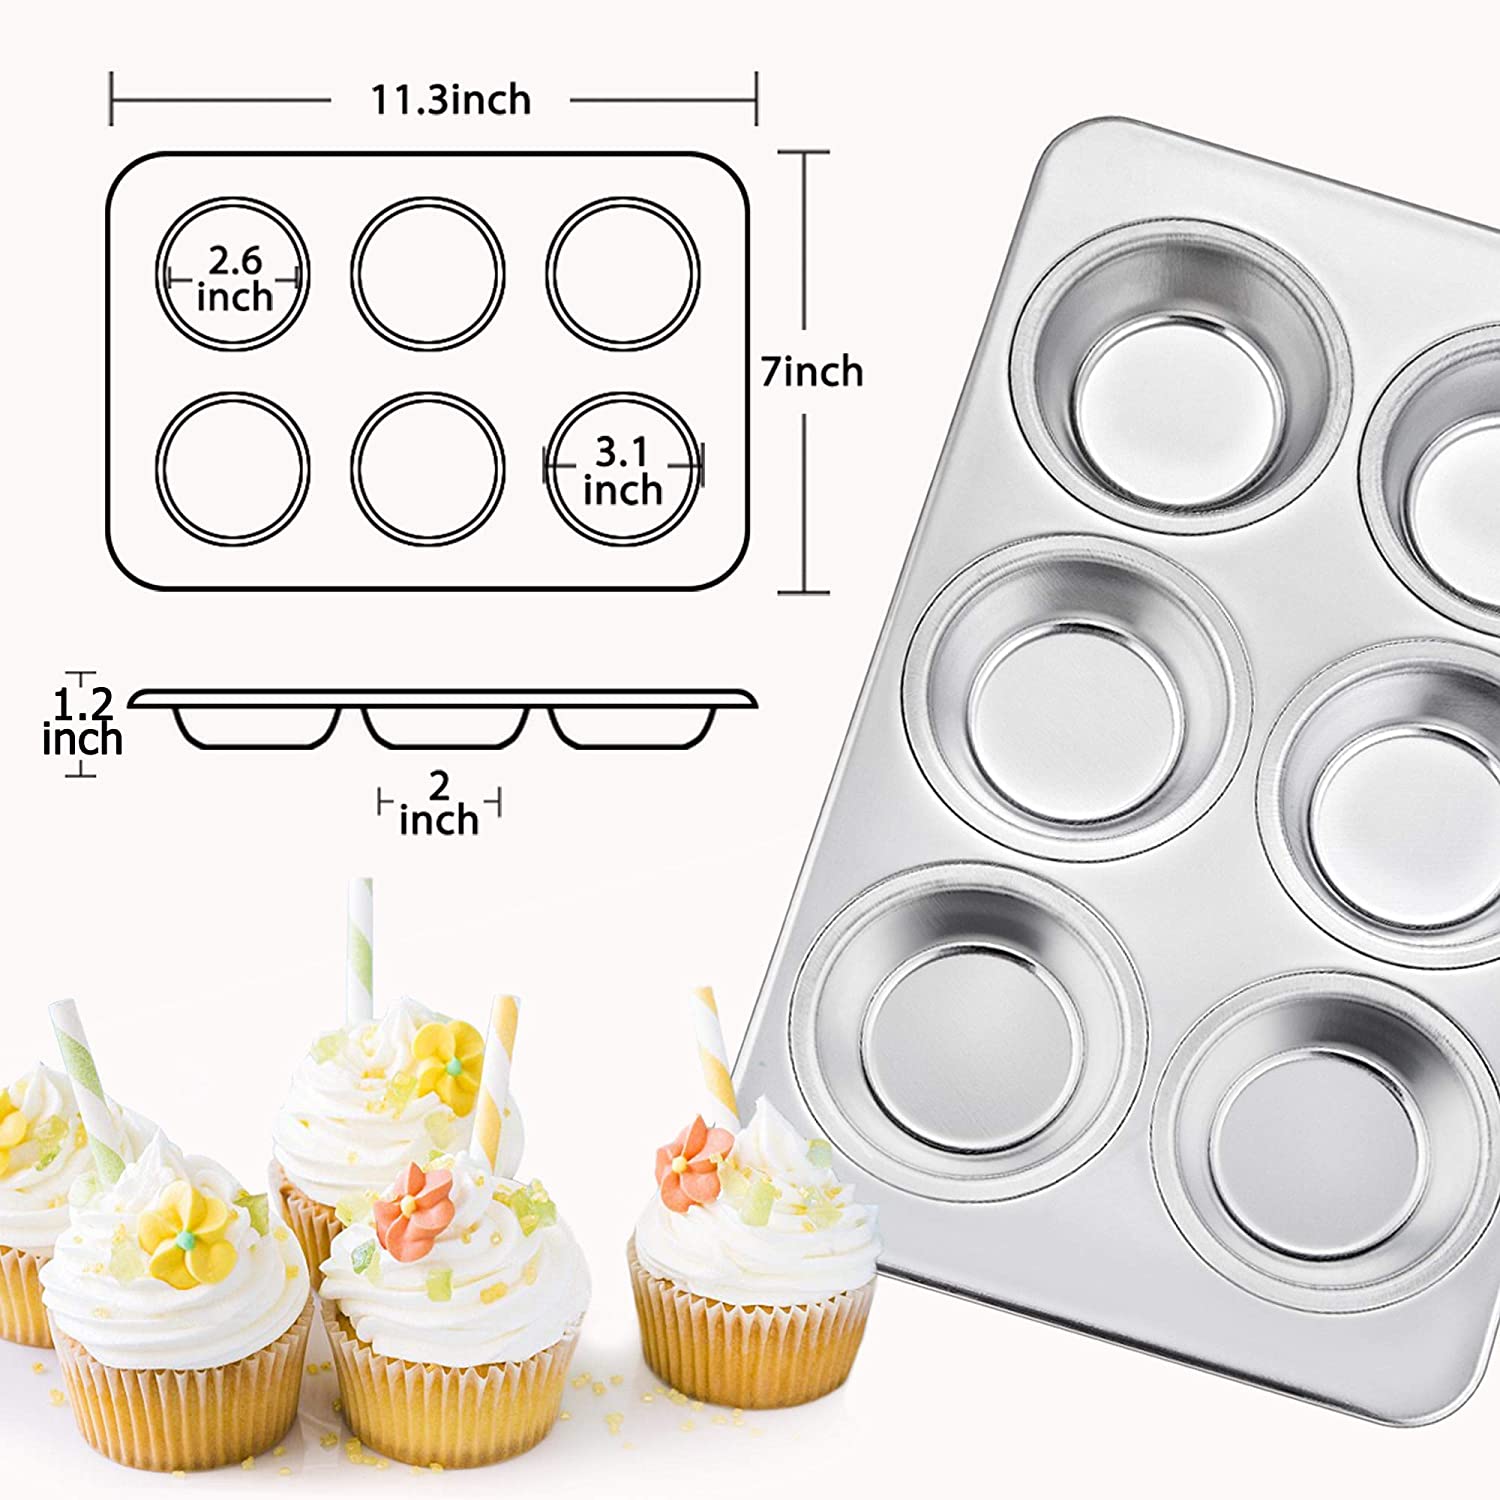 STAINLESS STEEL MINI MUFFIN TIN – Just Ingredients